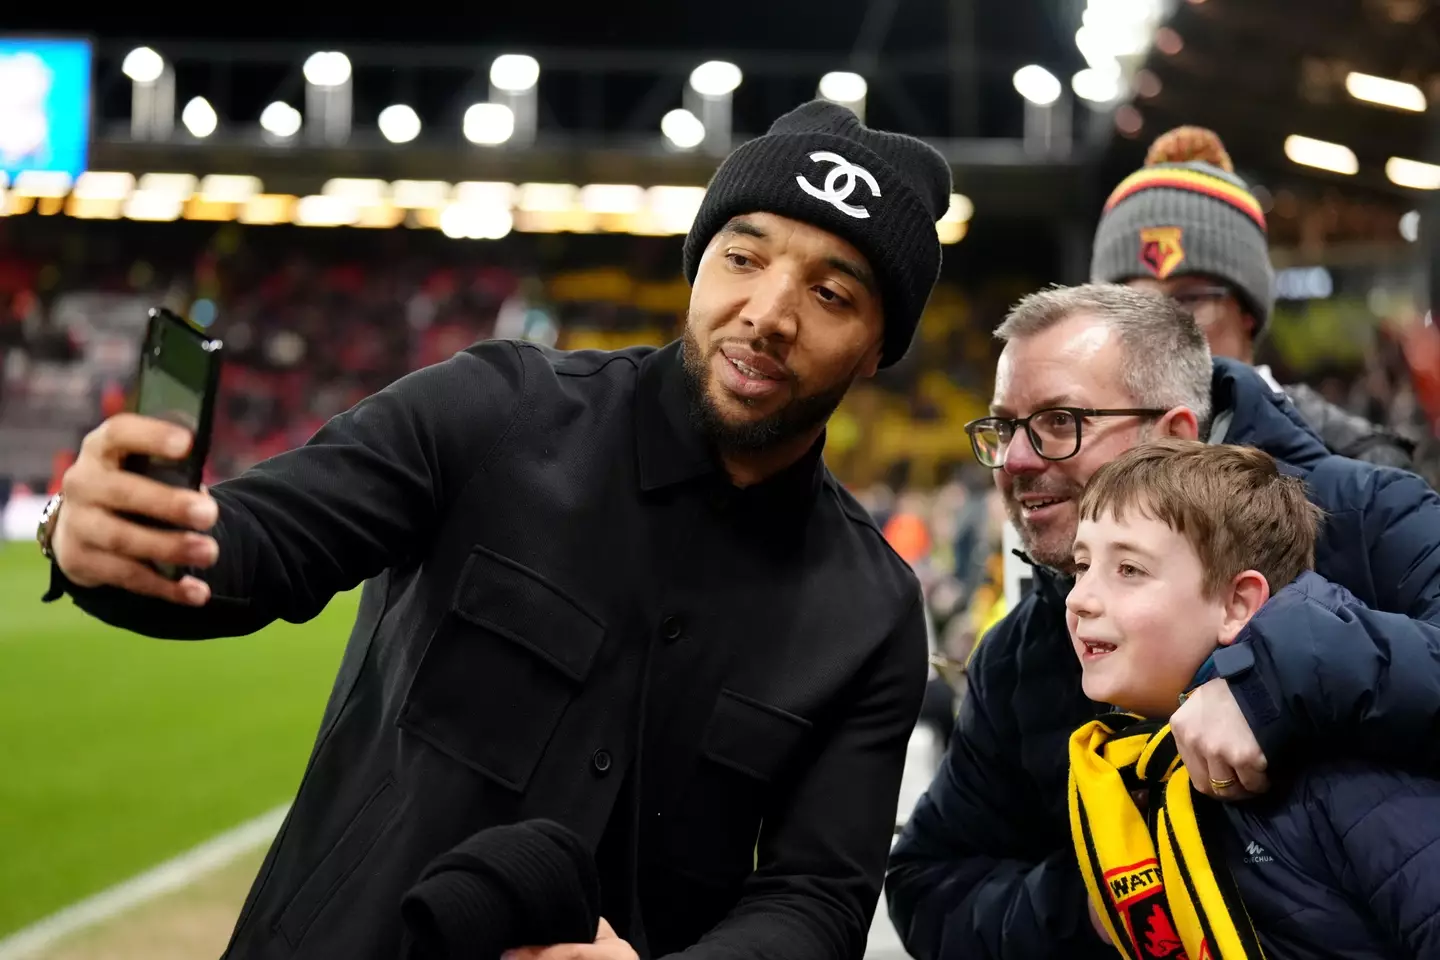 Deeney taking pictures with Watford fans. Image: Alamy